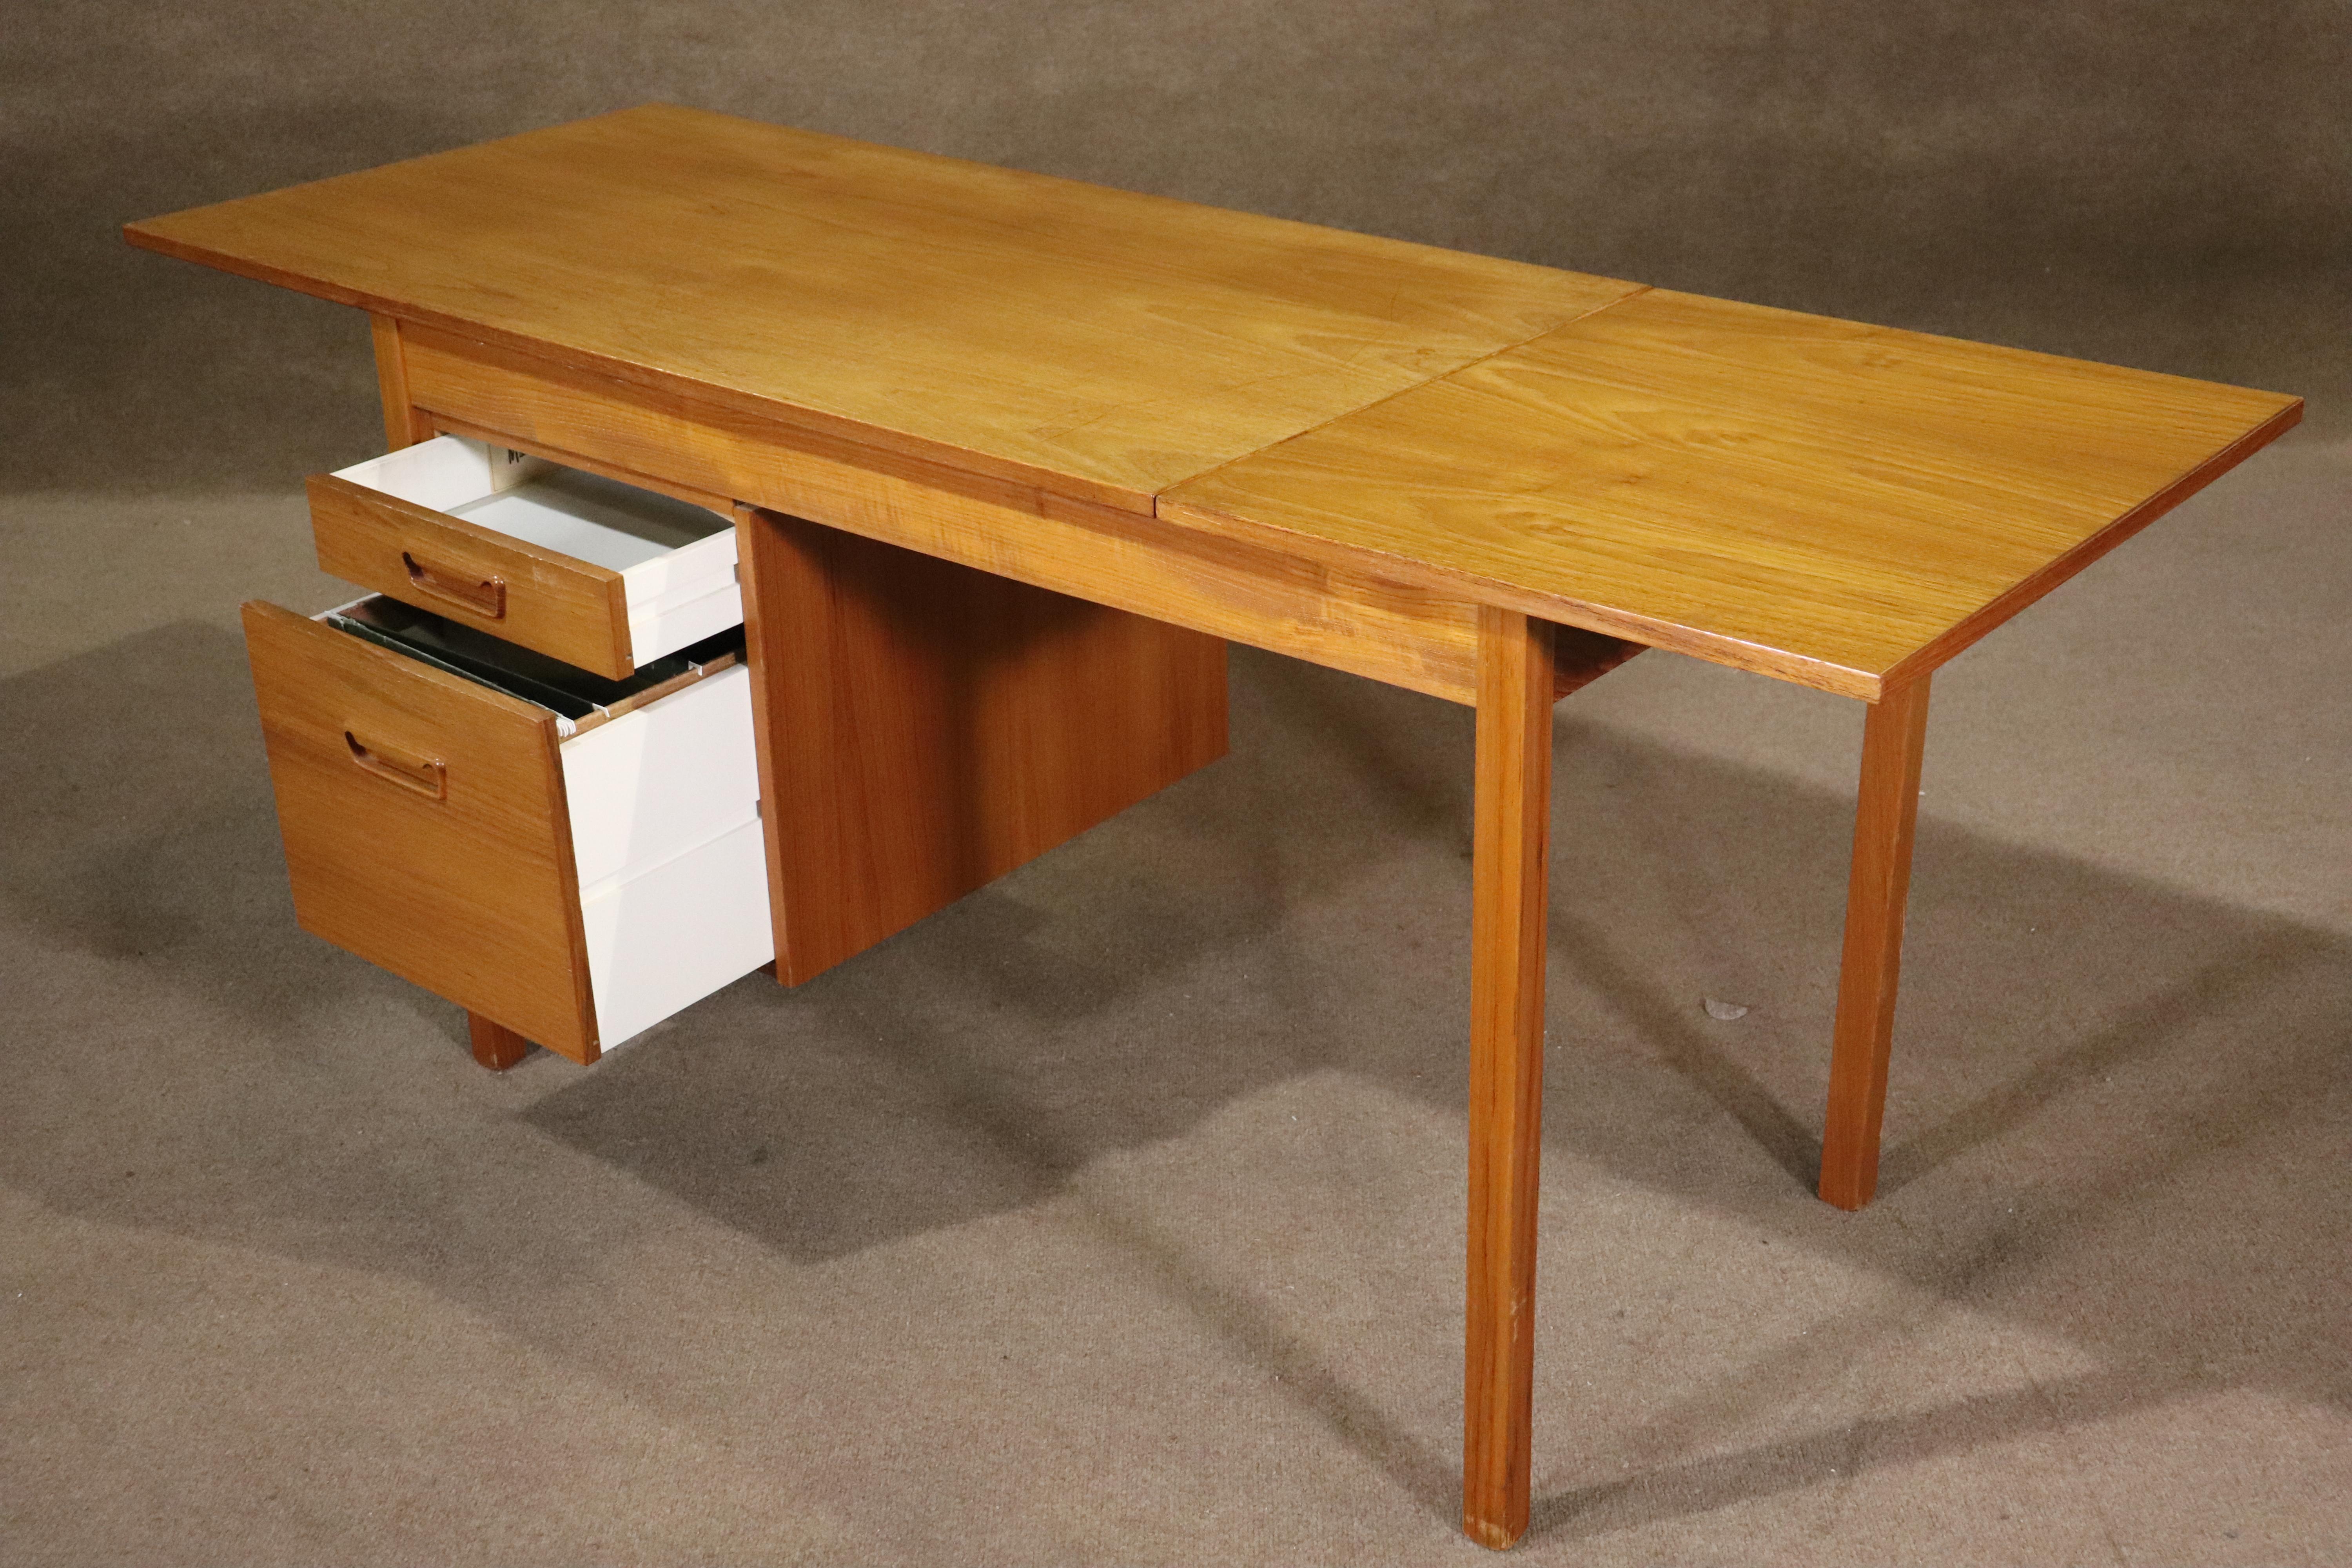 Teak mid-century desk with extra leaf that lifts and slides to extend the desk to 5.5 feet wide. Two drawers, including file size, with inset wood handles.
Please confirm location NY or NJ